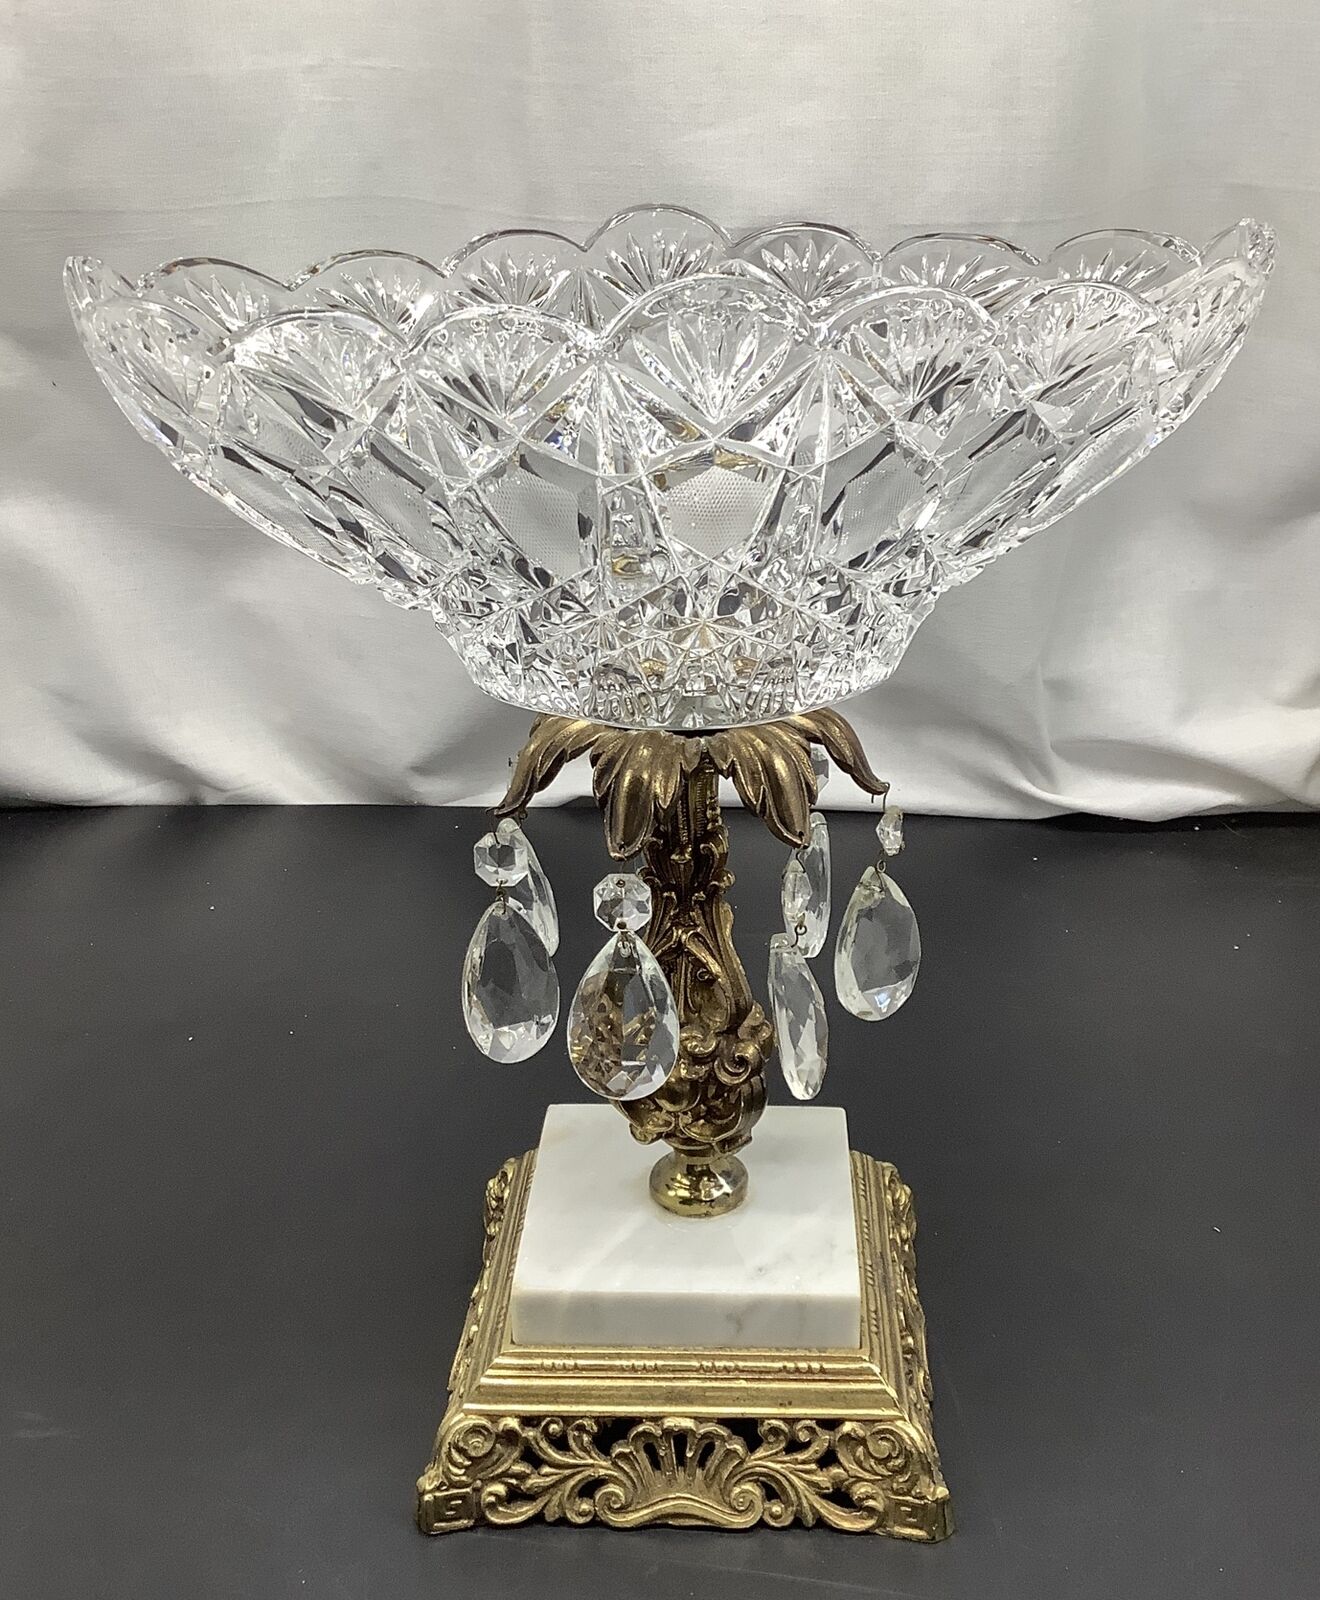 Vintage 14” Tall Crystal Prisms Brass Ornate Compote Centerpiece Marble Base